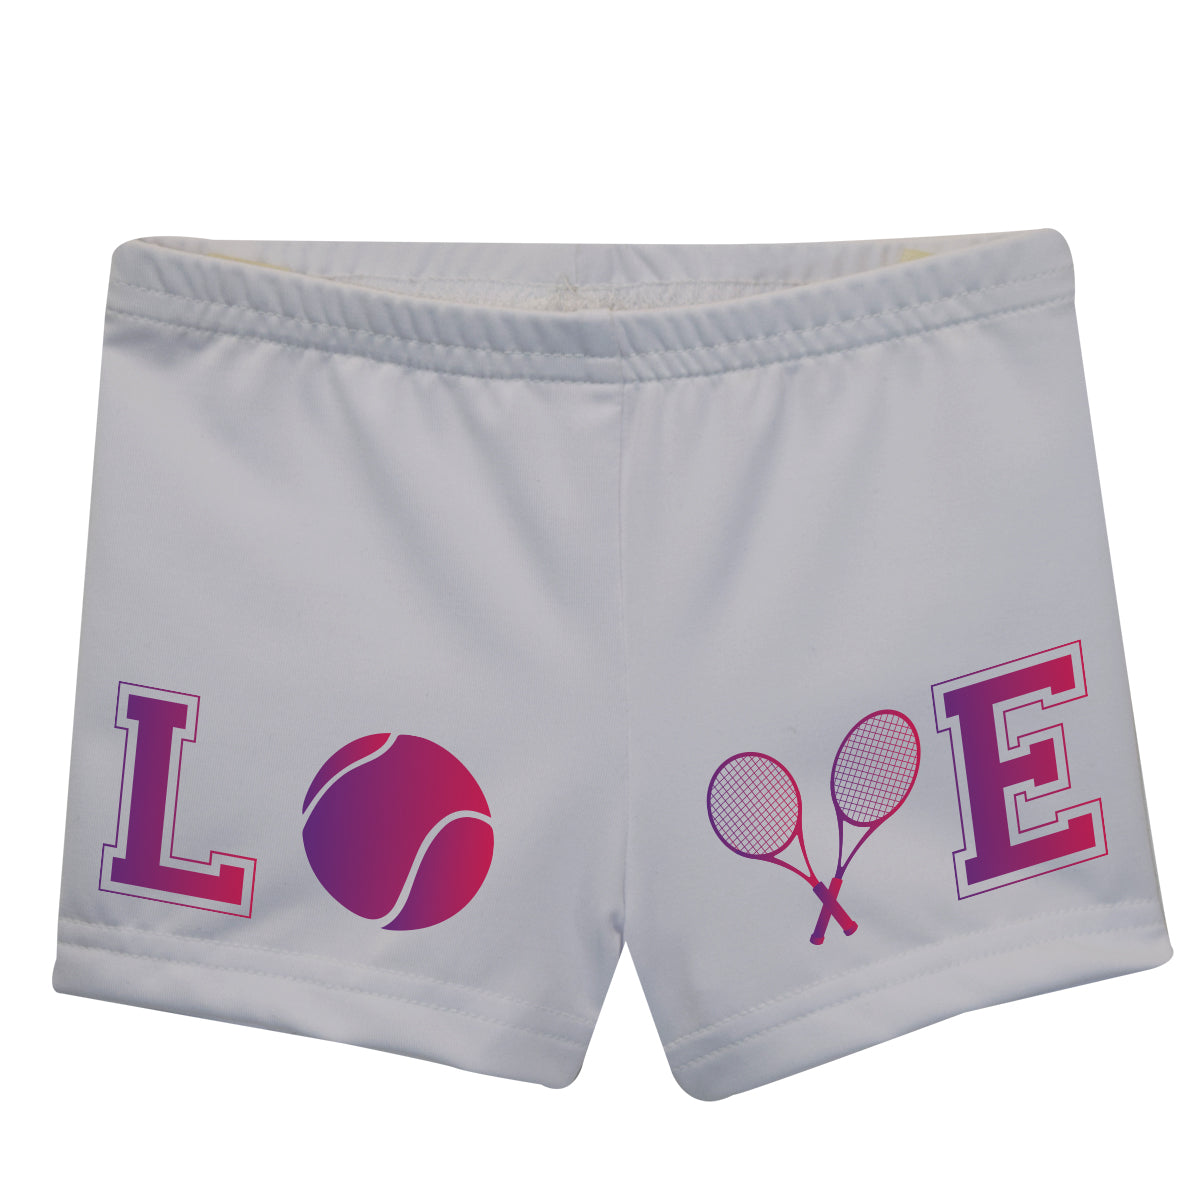 Love White and Pink Shorties